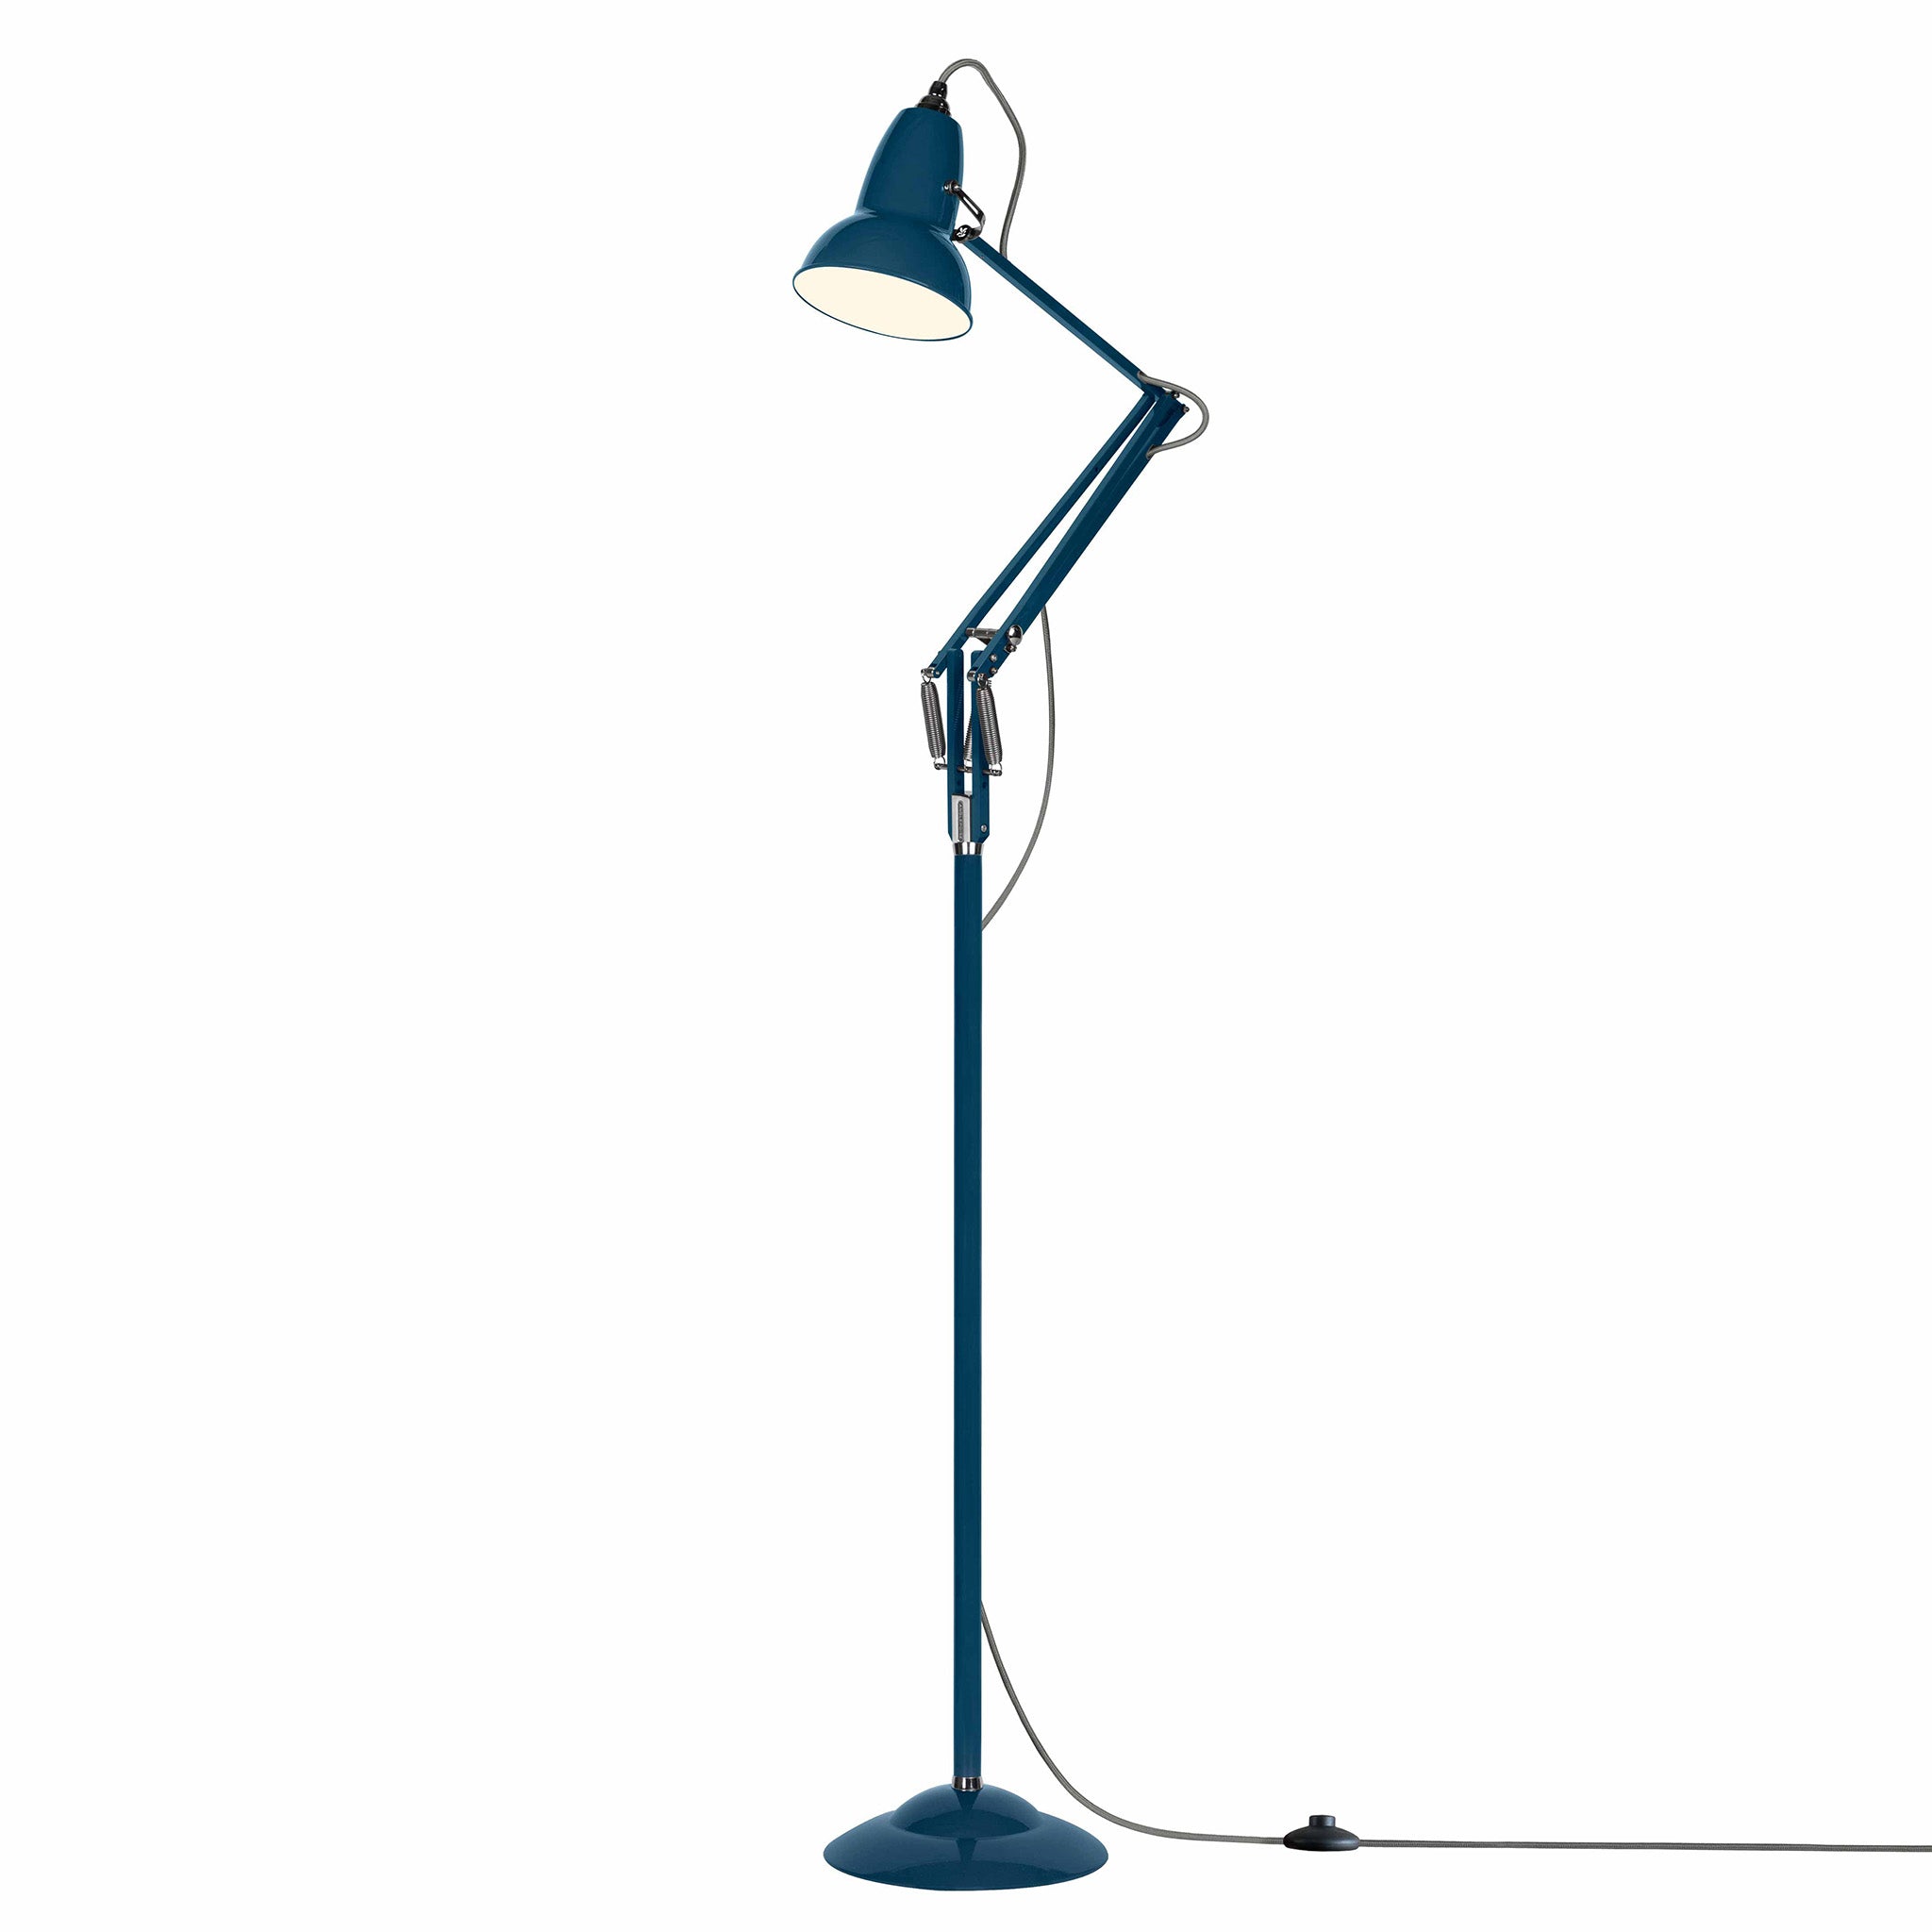 Original 1227 Floor Lamp / National Trust Edition by Anglepoise